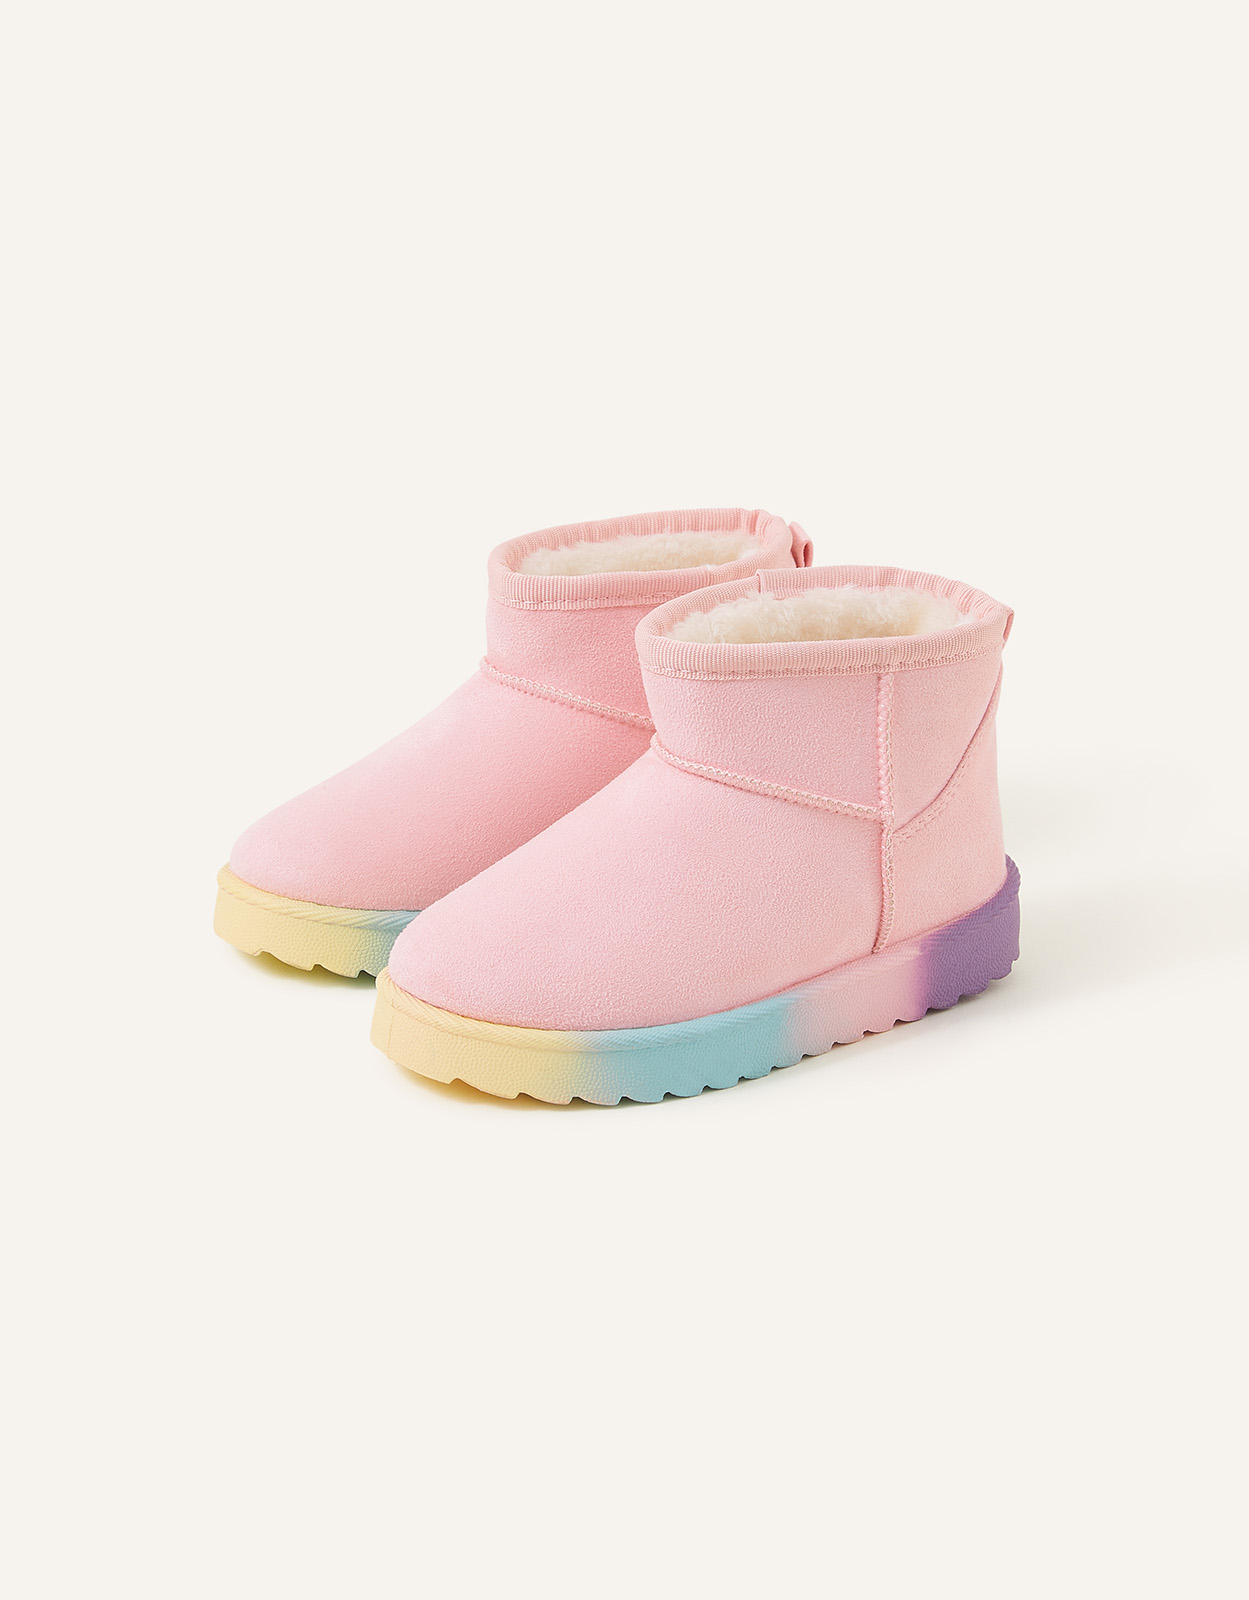 Accessorize Girl's Rainbow Sole Faux Suede Boots Pink, Size: 2